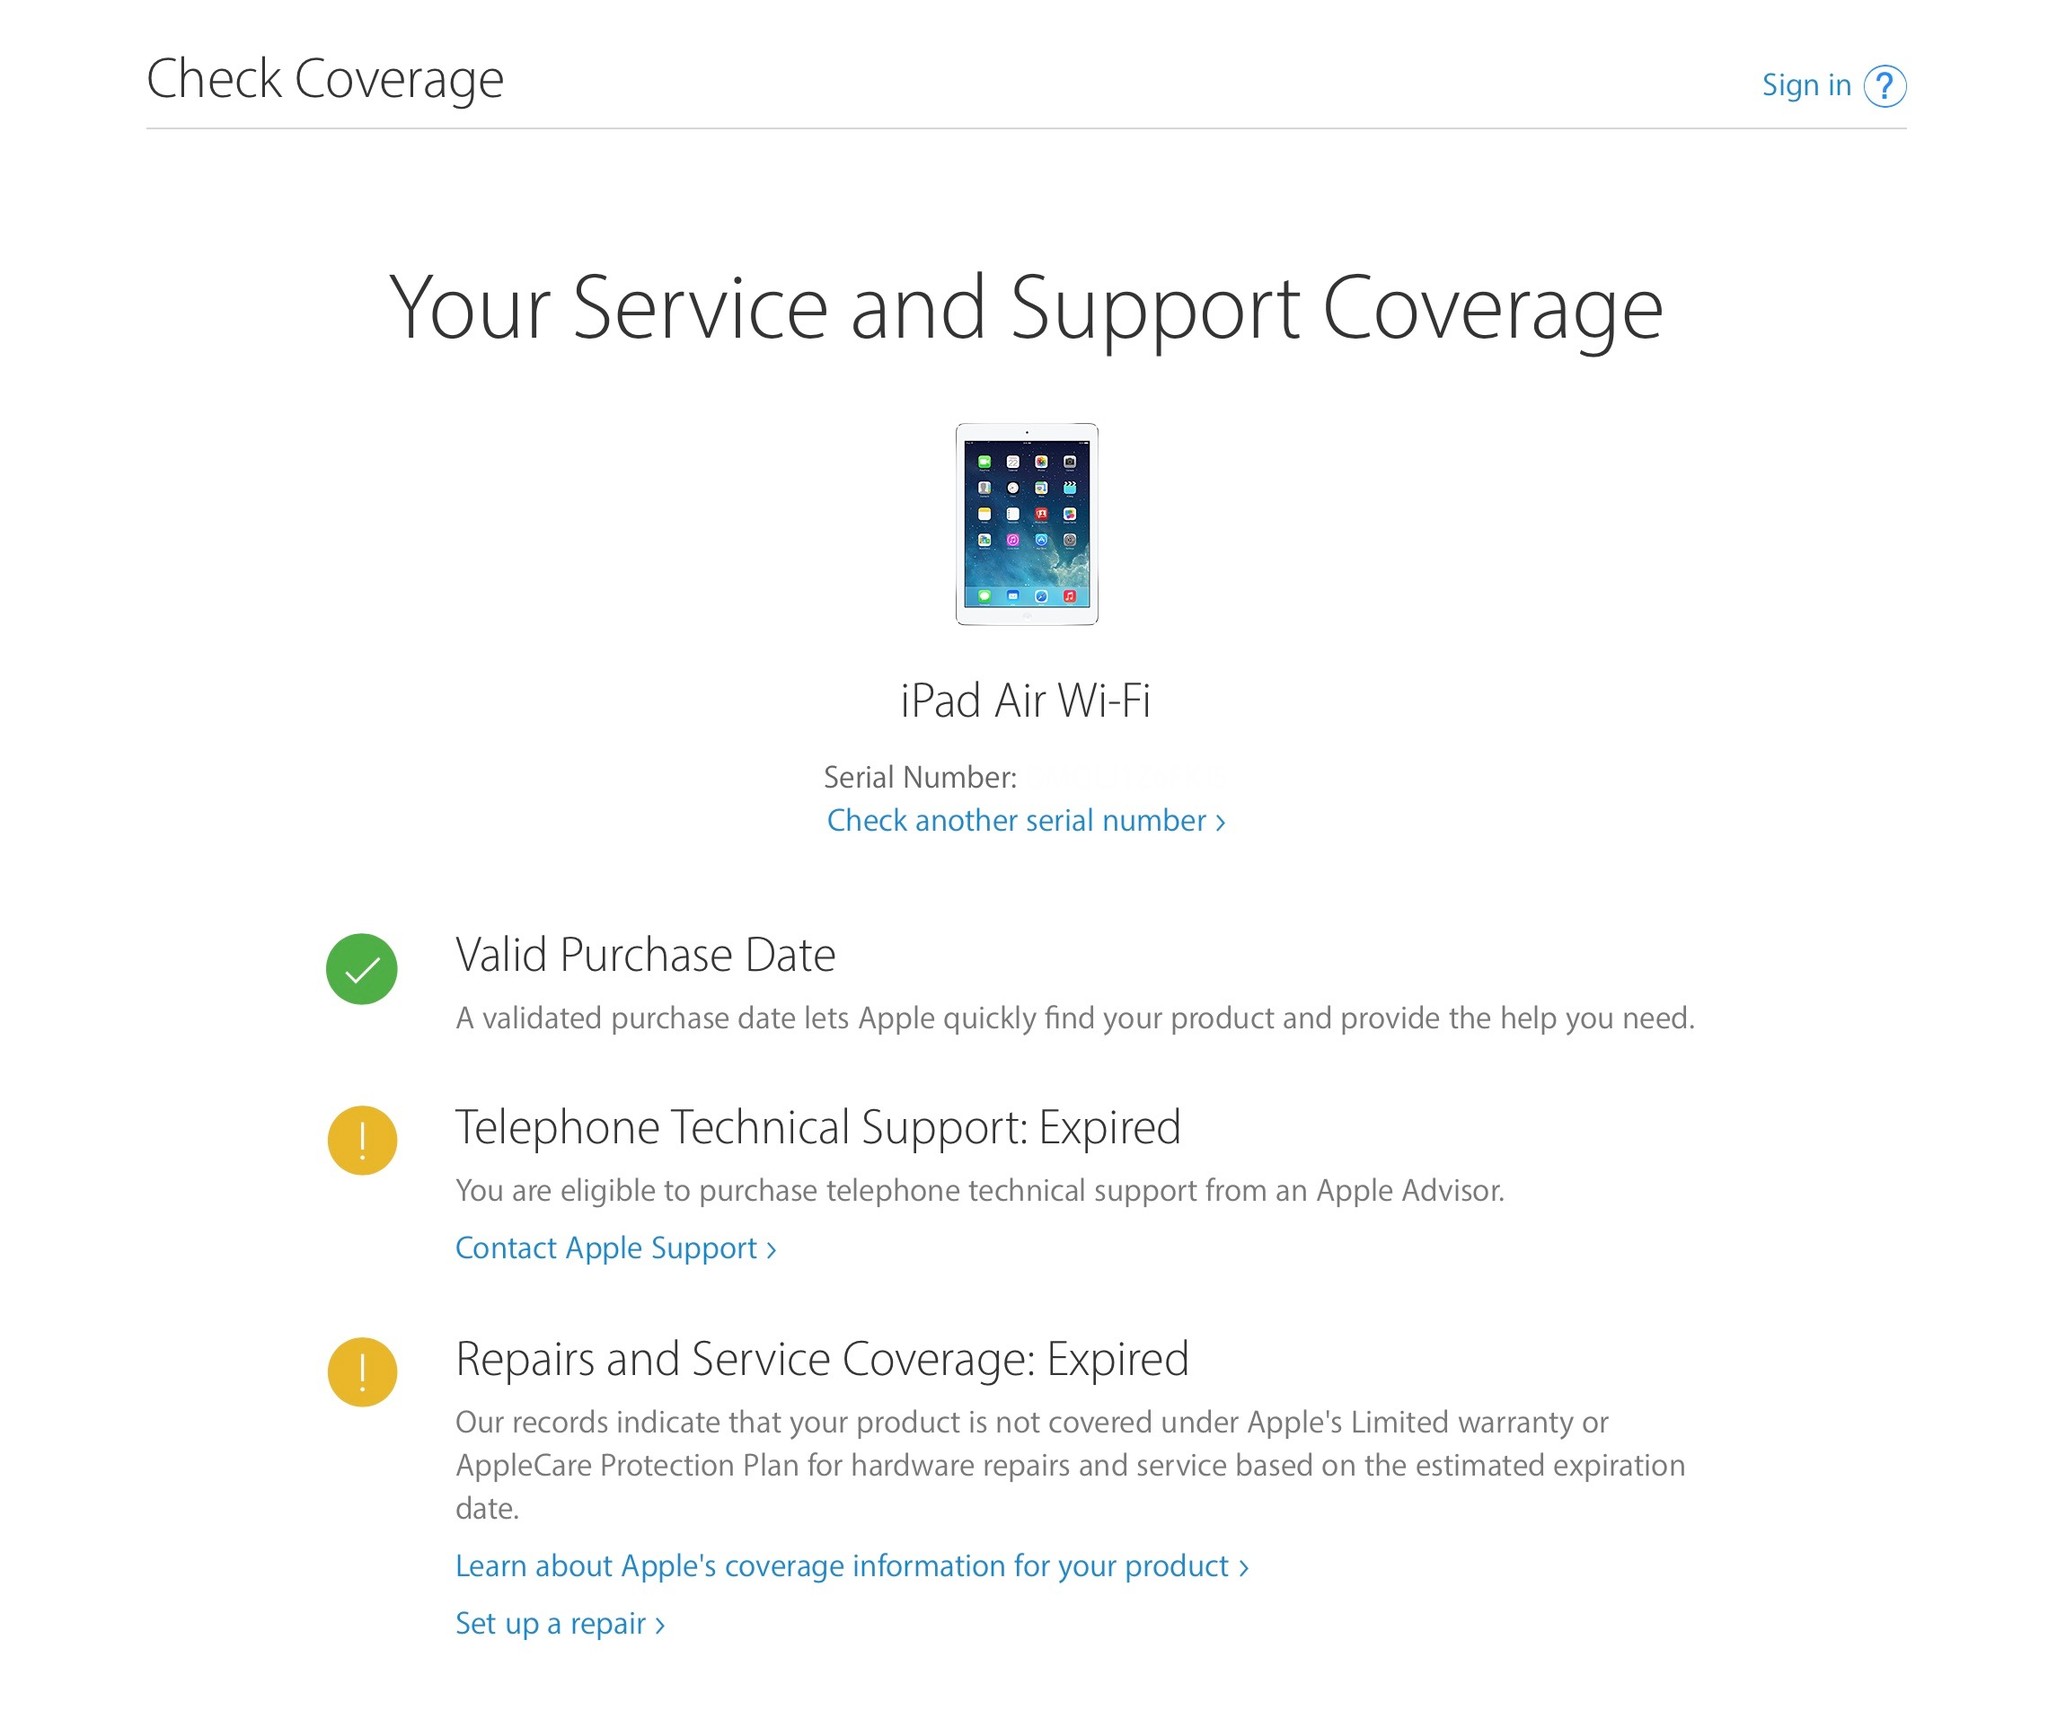 A device with expired AppleCare coverage